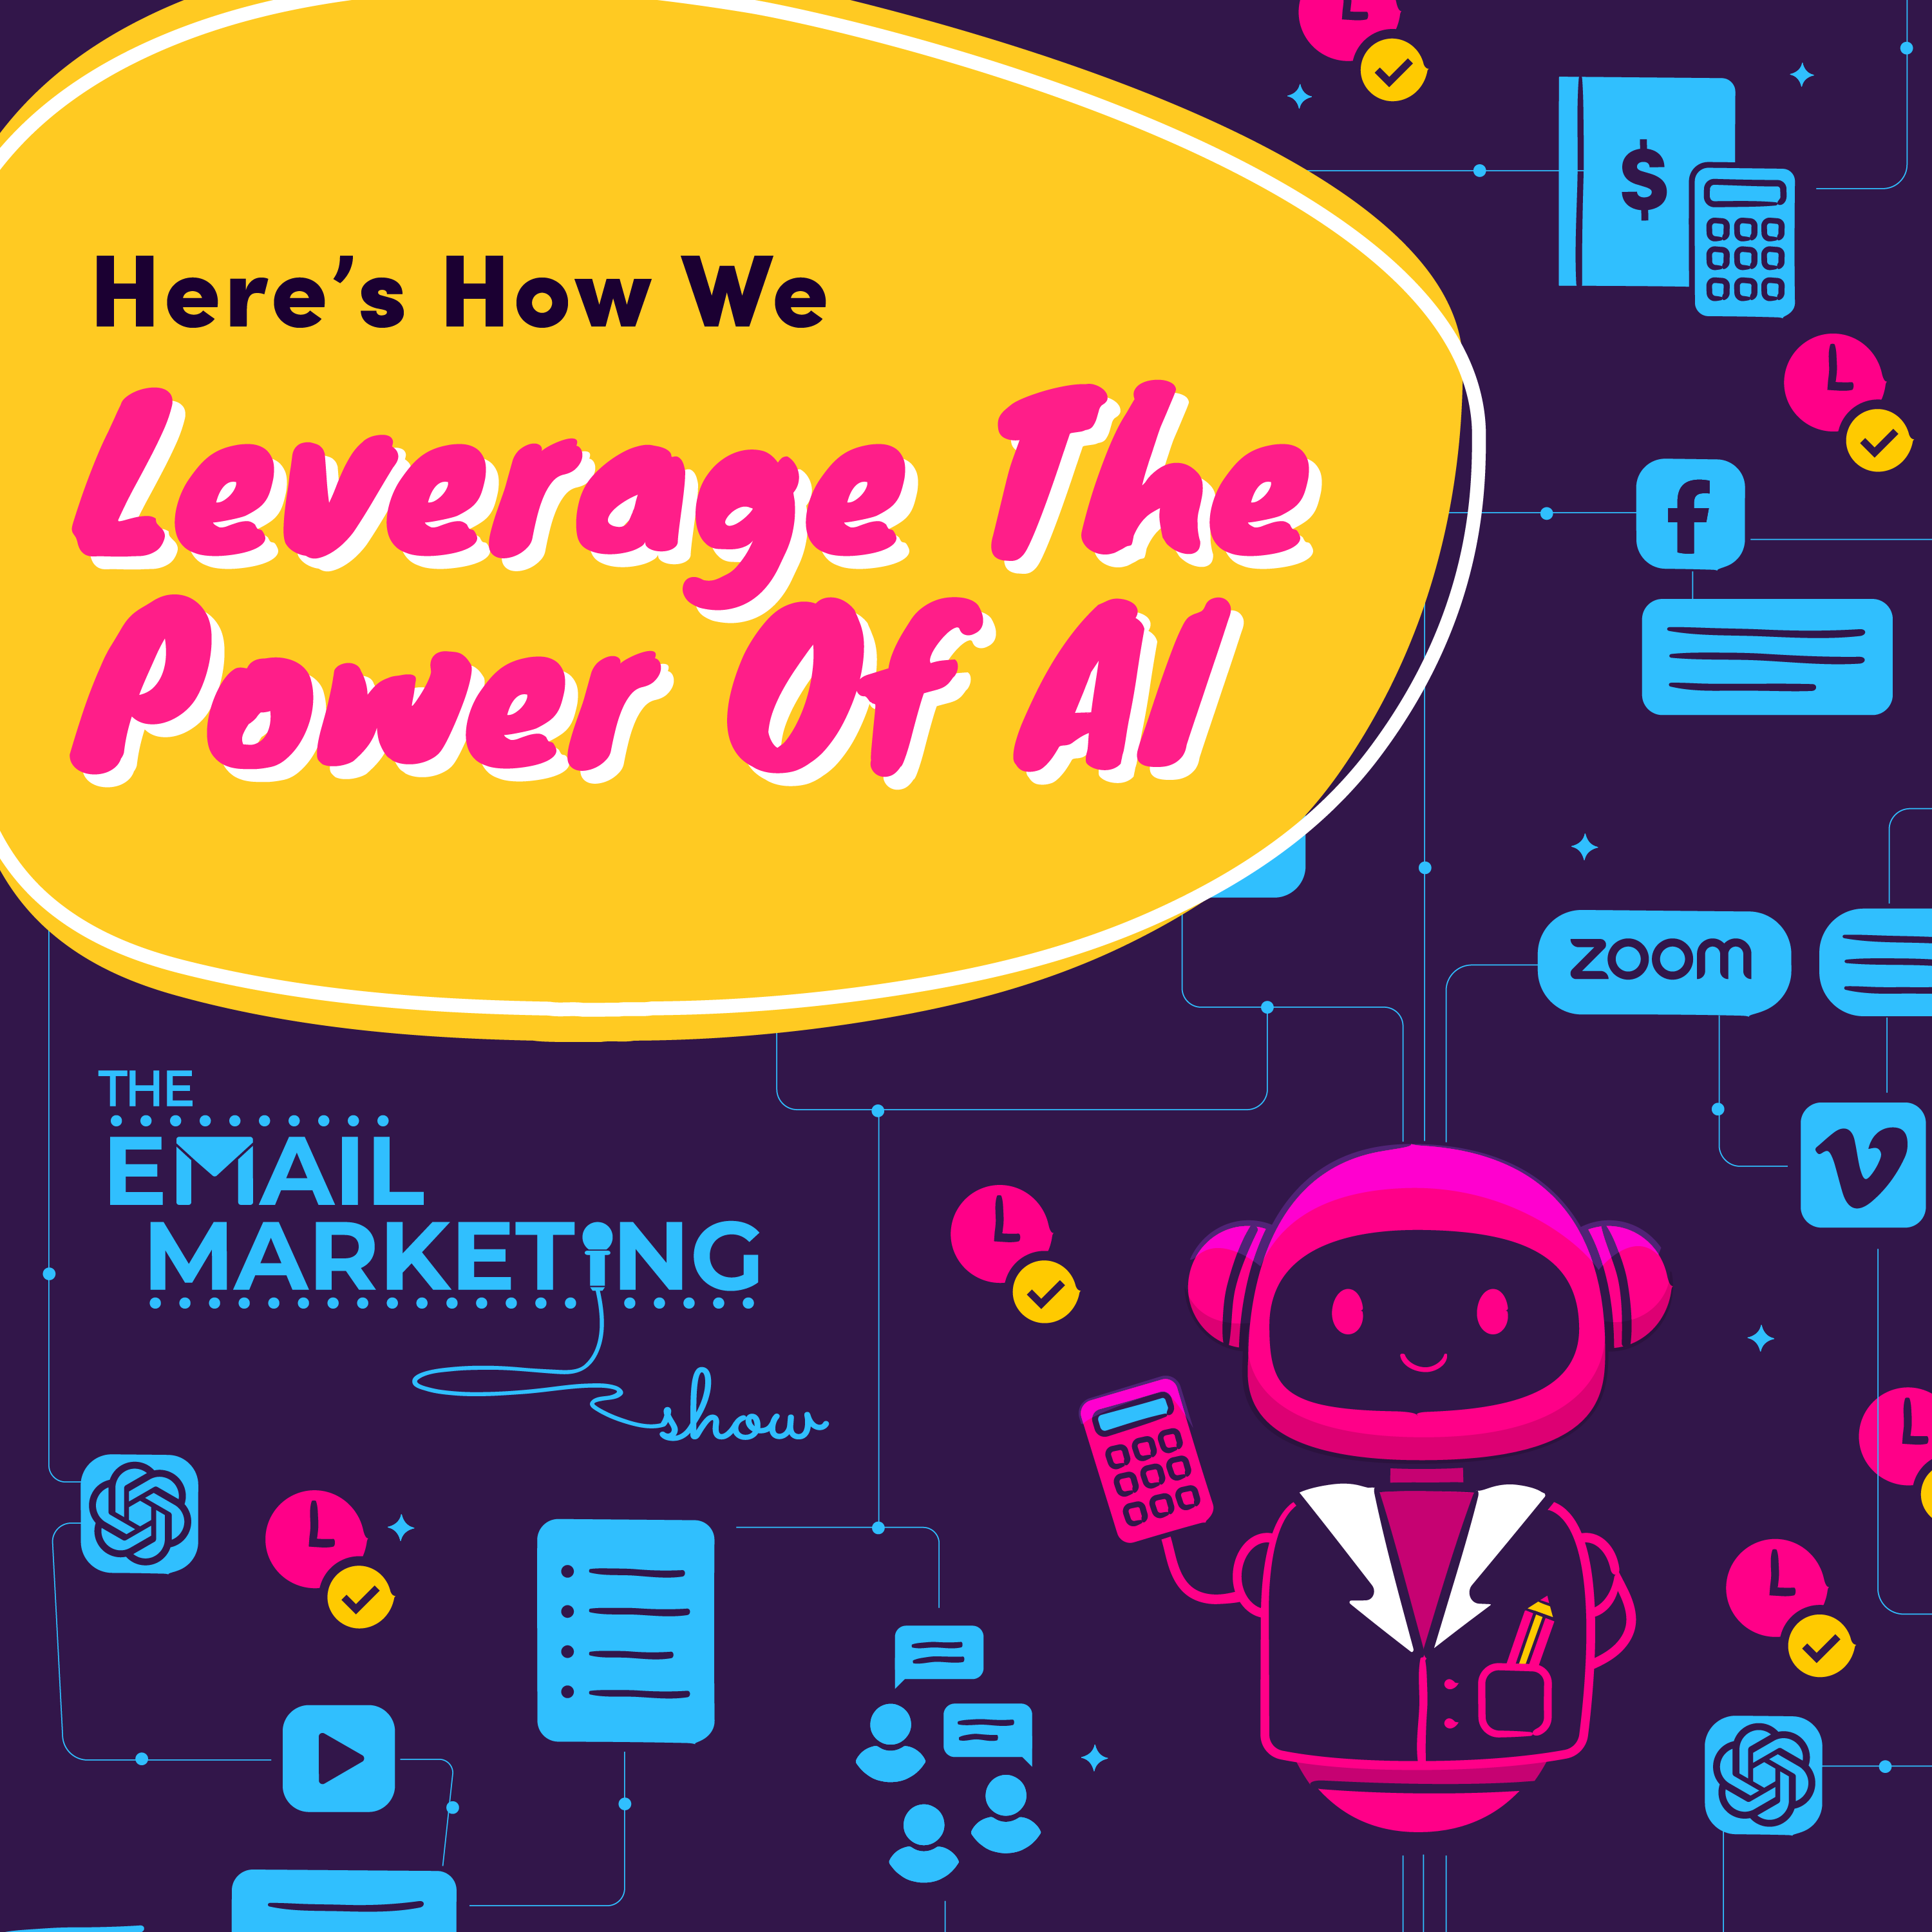 How We Are Leveraging The Power Of AI In Our Business